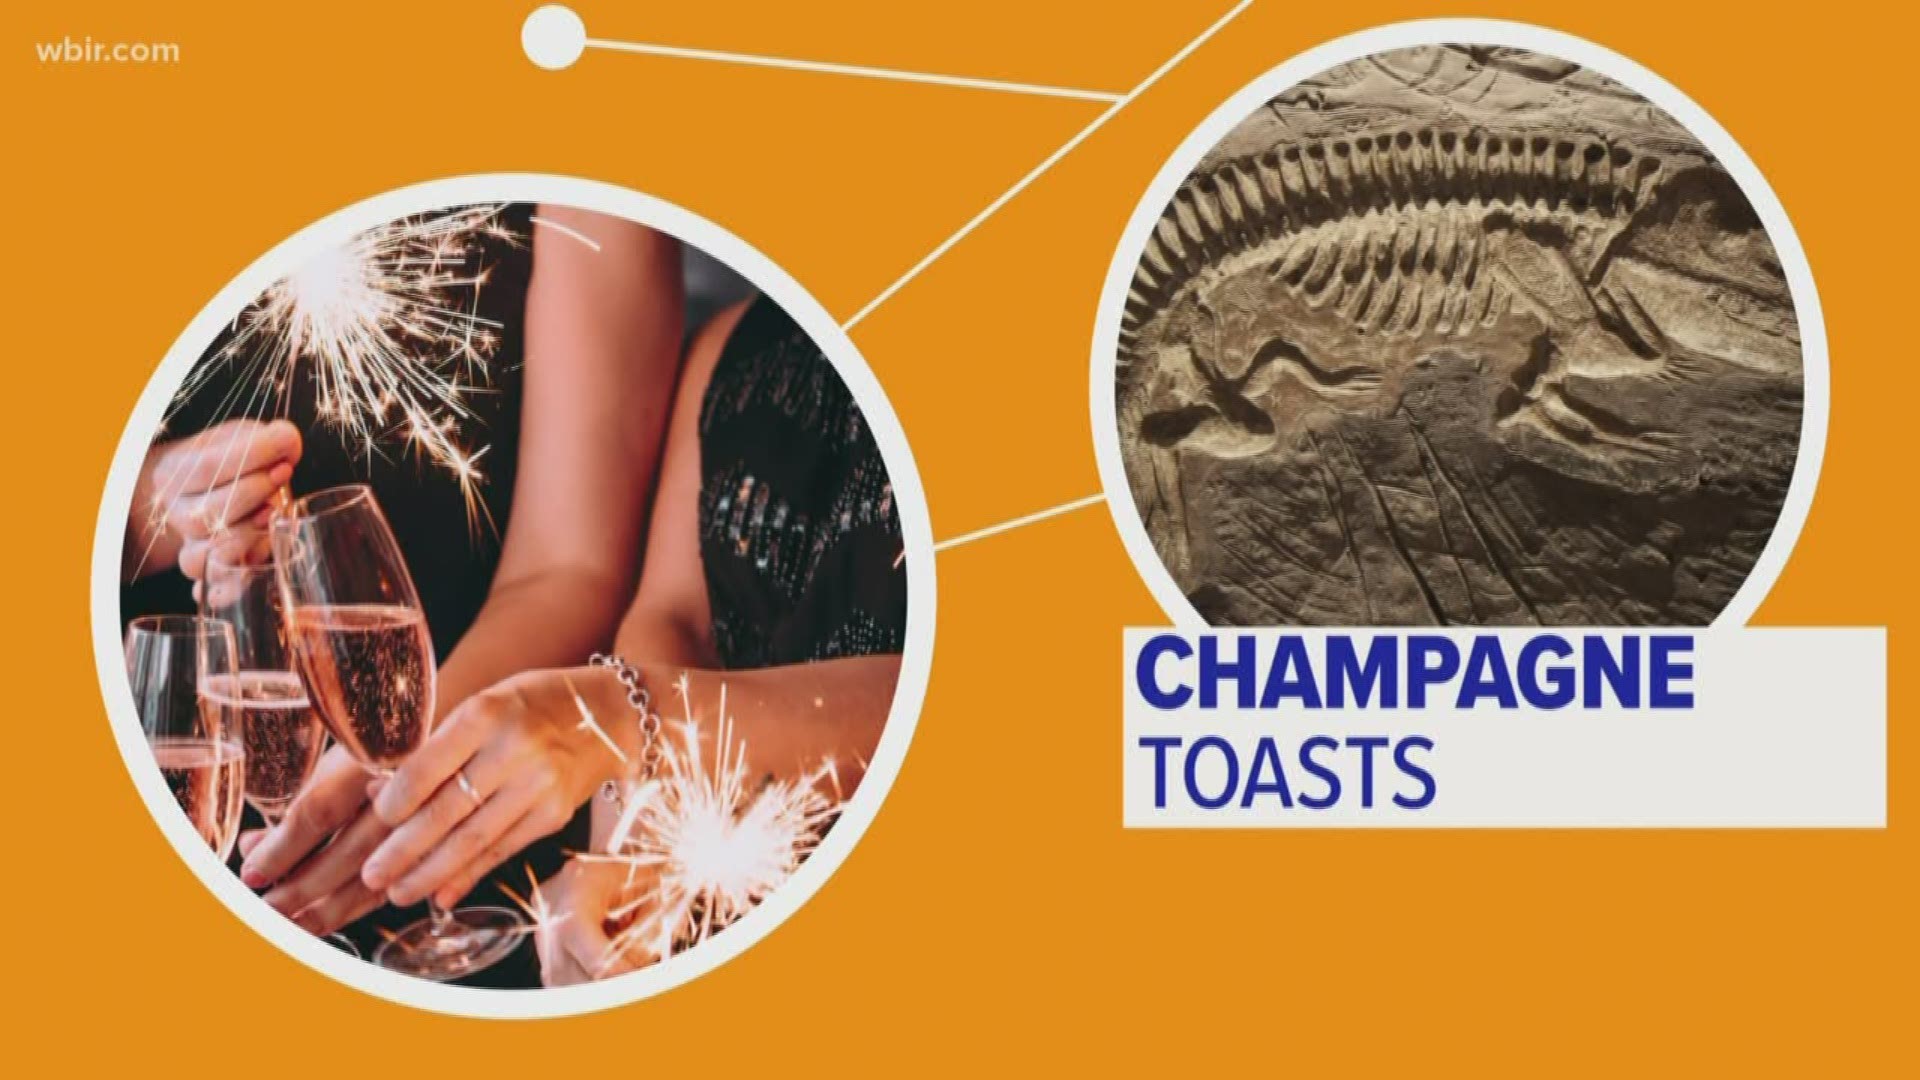 Looking at the connection between prehistoric animals and modern champagne toasts!